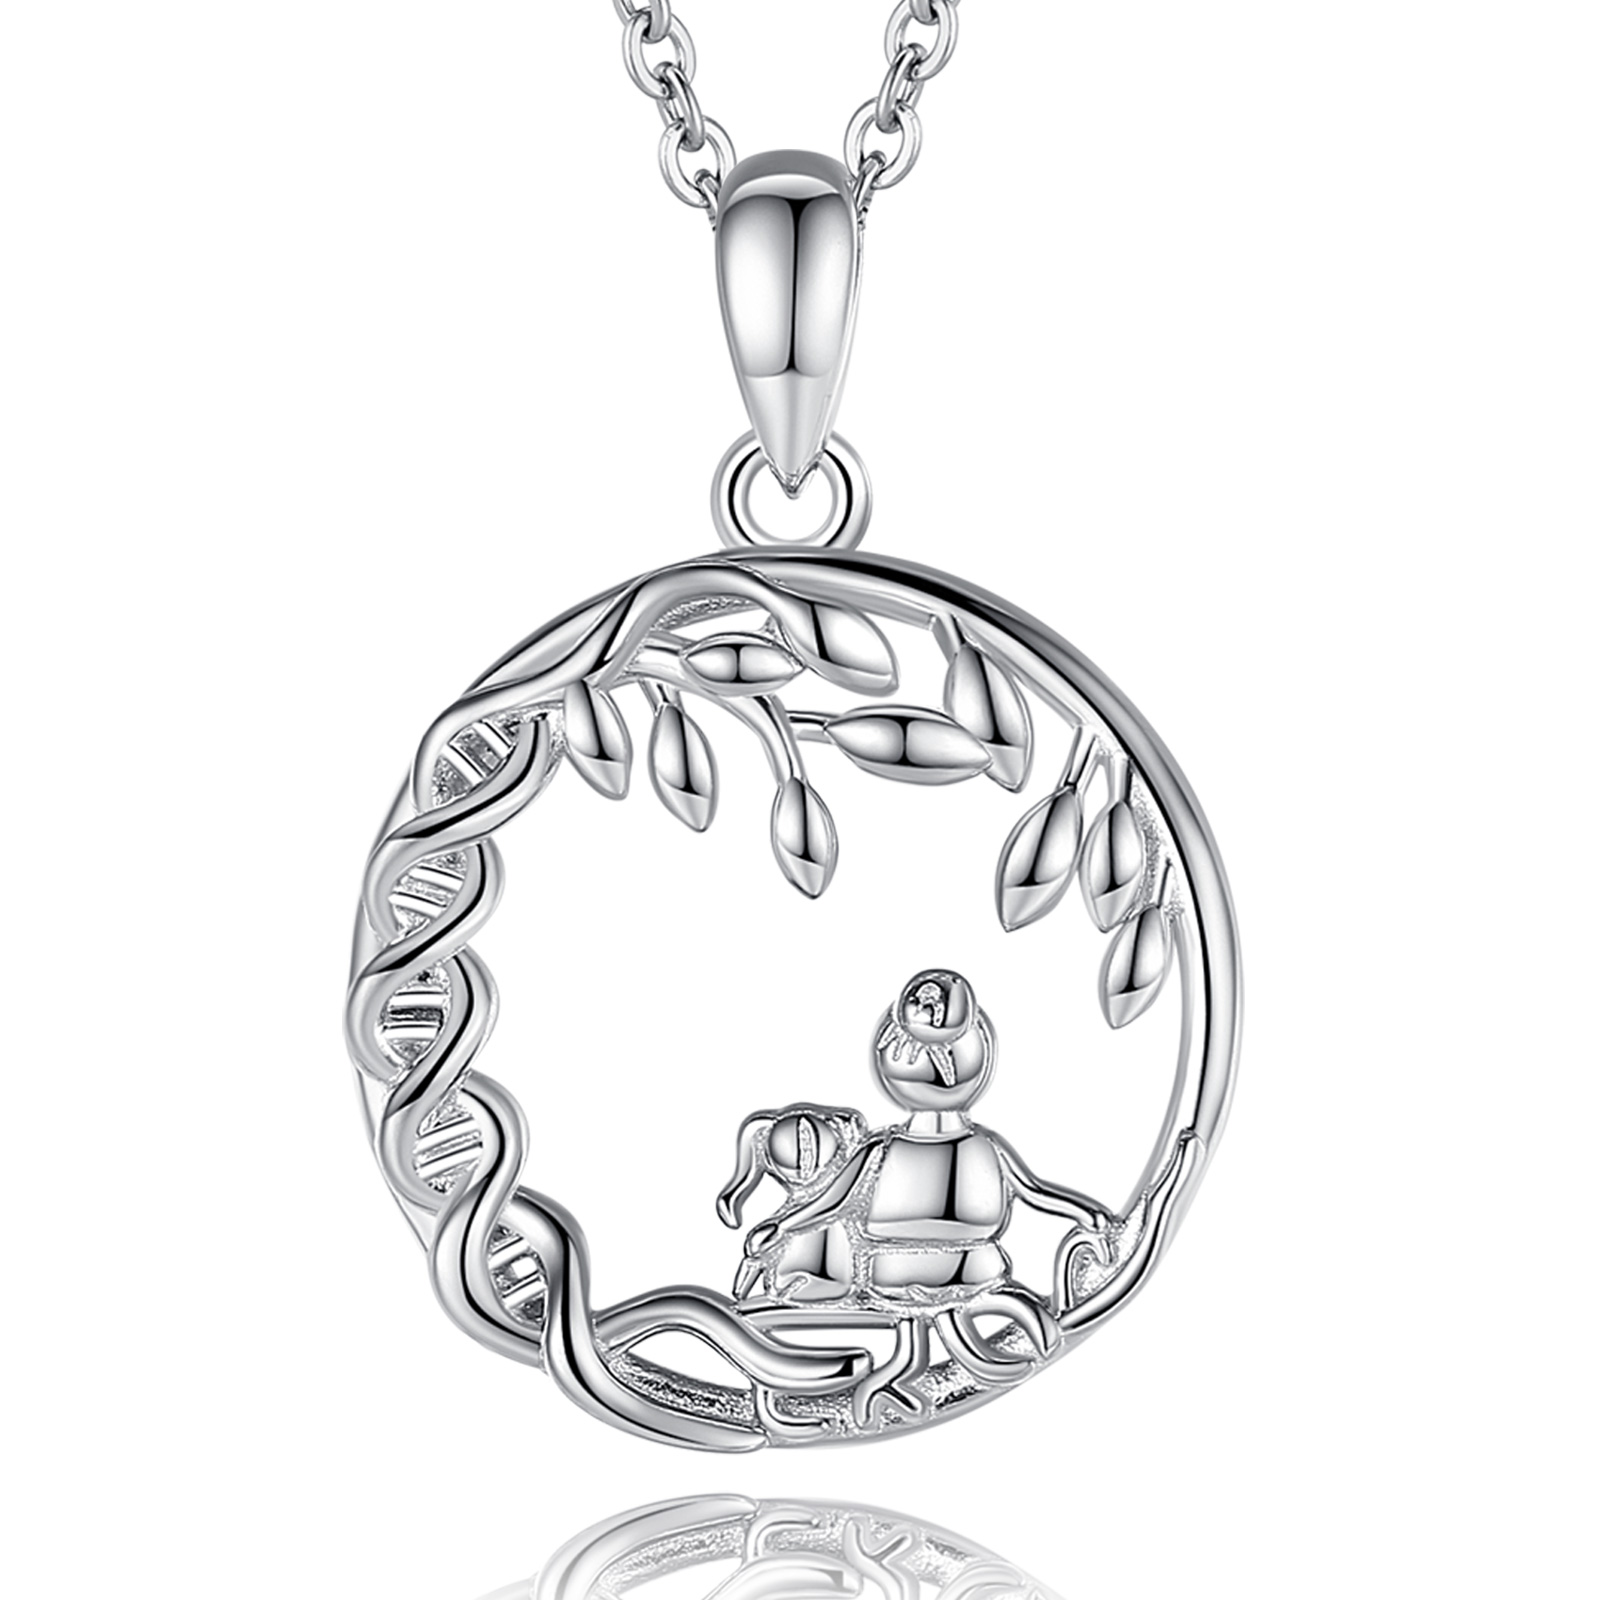 Merryshine Jewelry Wholesale Mother Day Gifts Mom and Daughter Sterling Silver Necklace